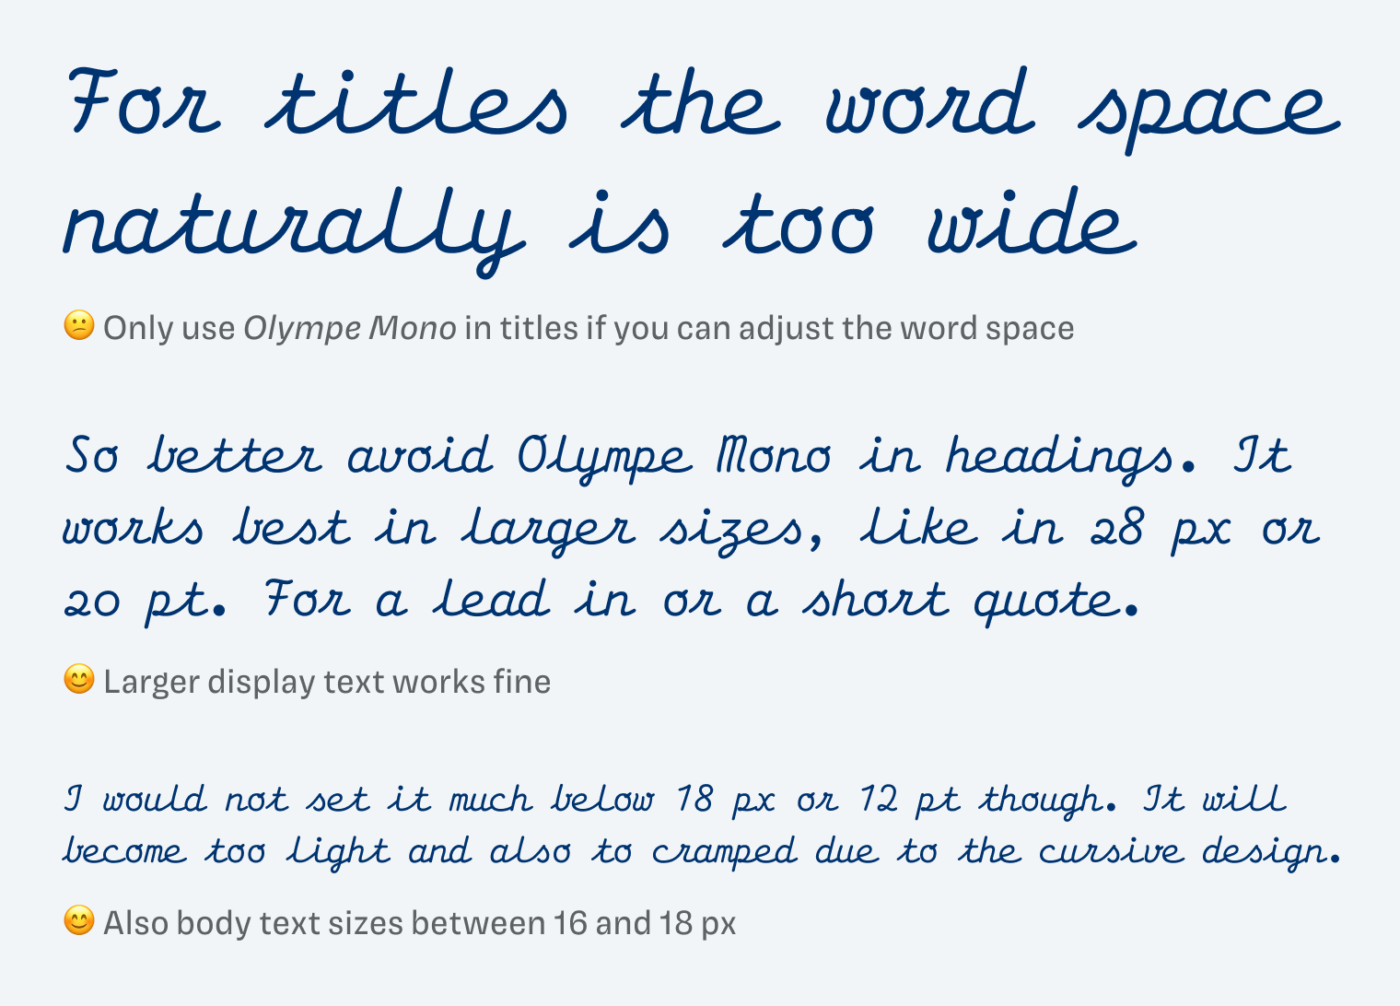 😕 Only use Olympe Mono in titles if you can adjust the word space: For titles the word space naturally is too wide.

Larger display text works fine
So better avoid Olympe Mono in headings. It works best in larger sizes, like in 28 px or 20 pt. For a lead in or a short quote.
Also body text sizes between 16 and 18 px:
I would not set it much below 18 px or 12 pt though. It will become too light and also to cramped due to the cursive design.